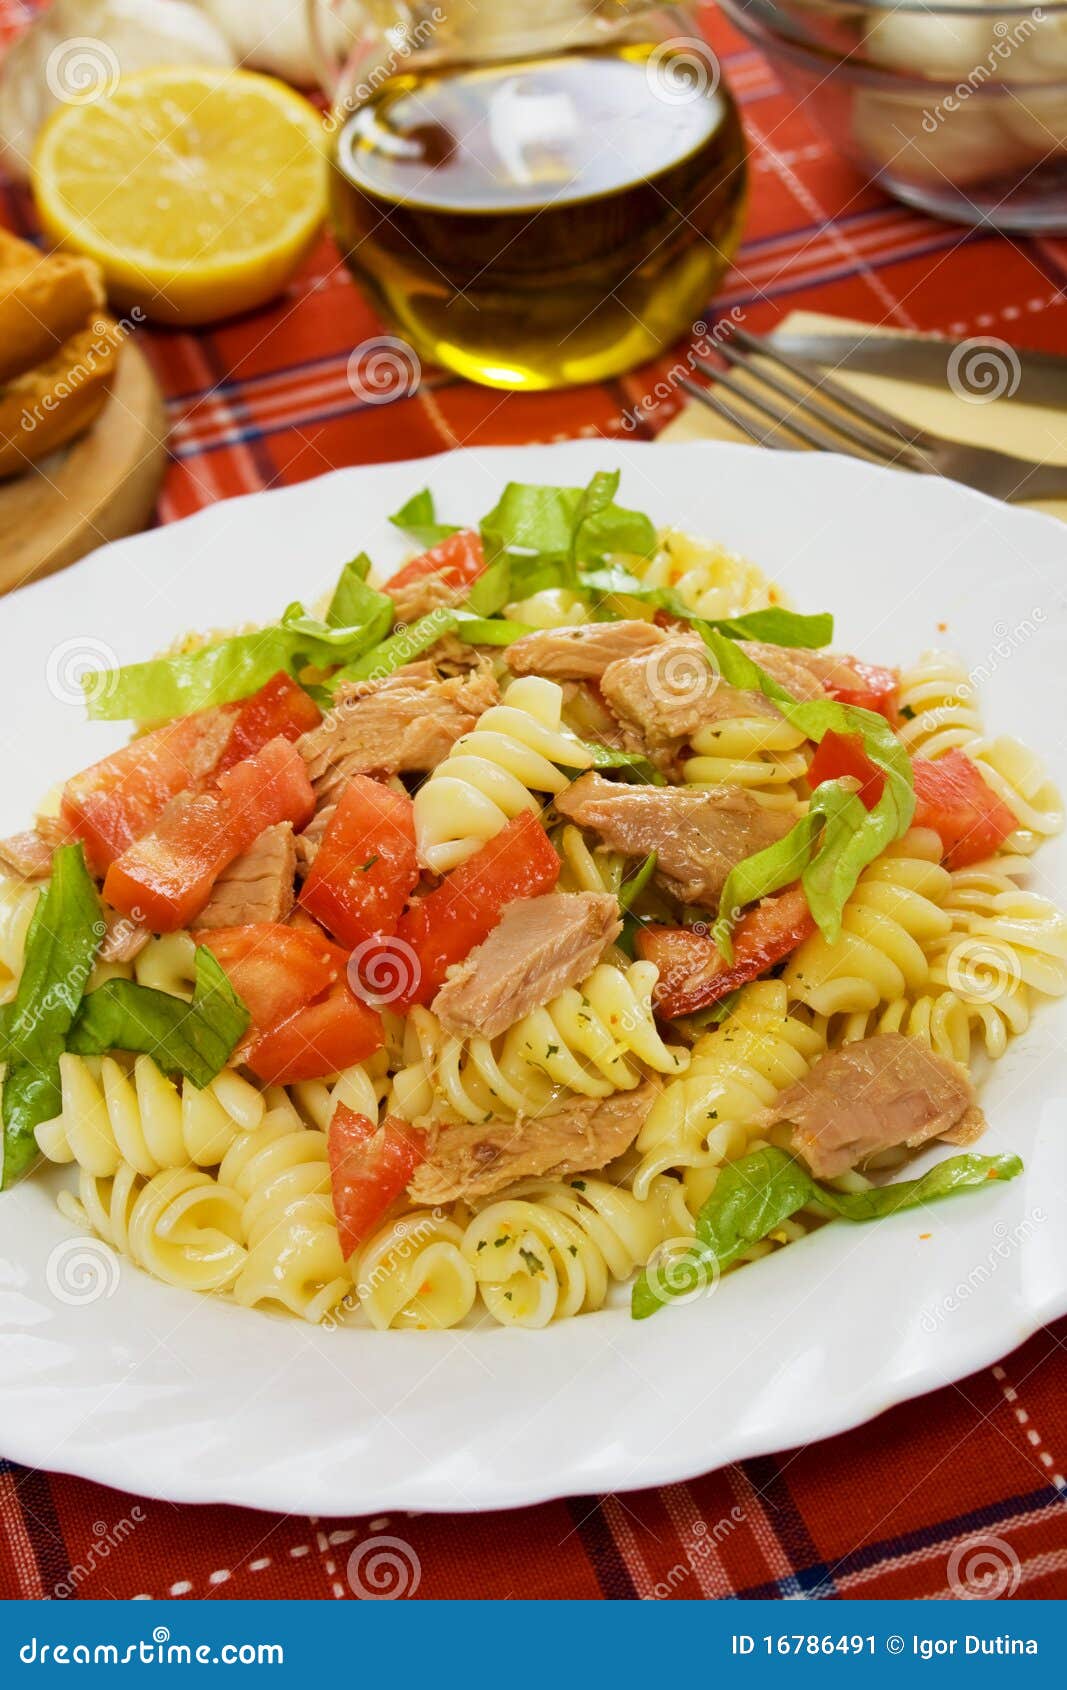 Tuna Salad with Lettuce and Tomato Stock Image - Image of fish, pasta ...